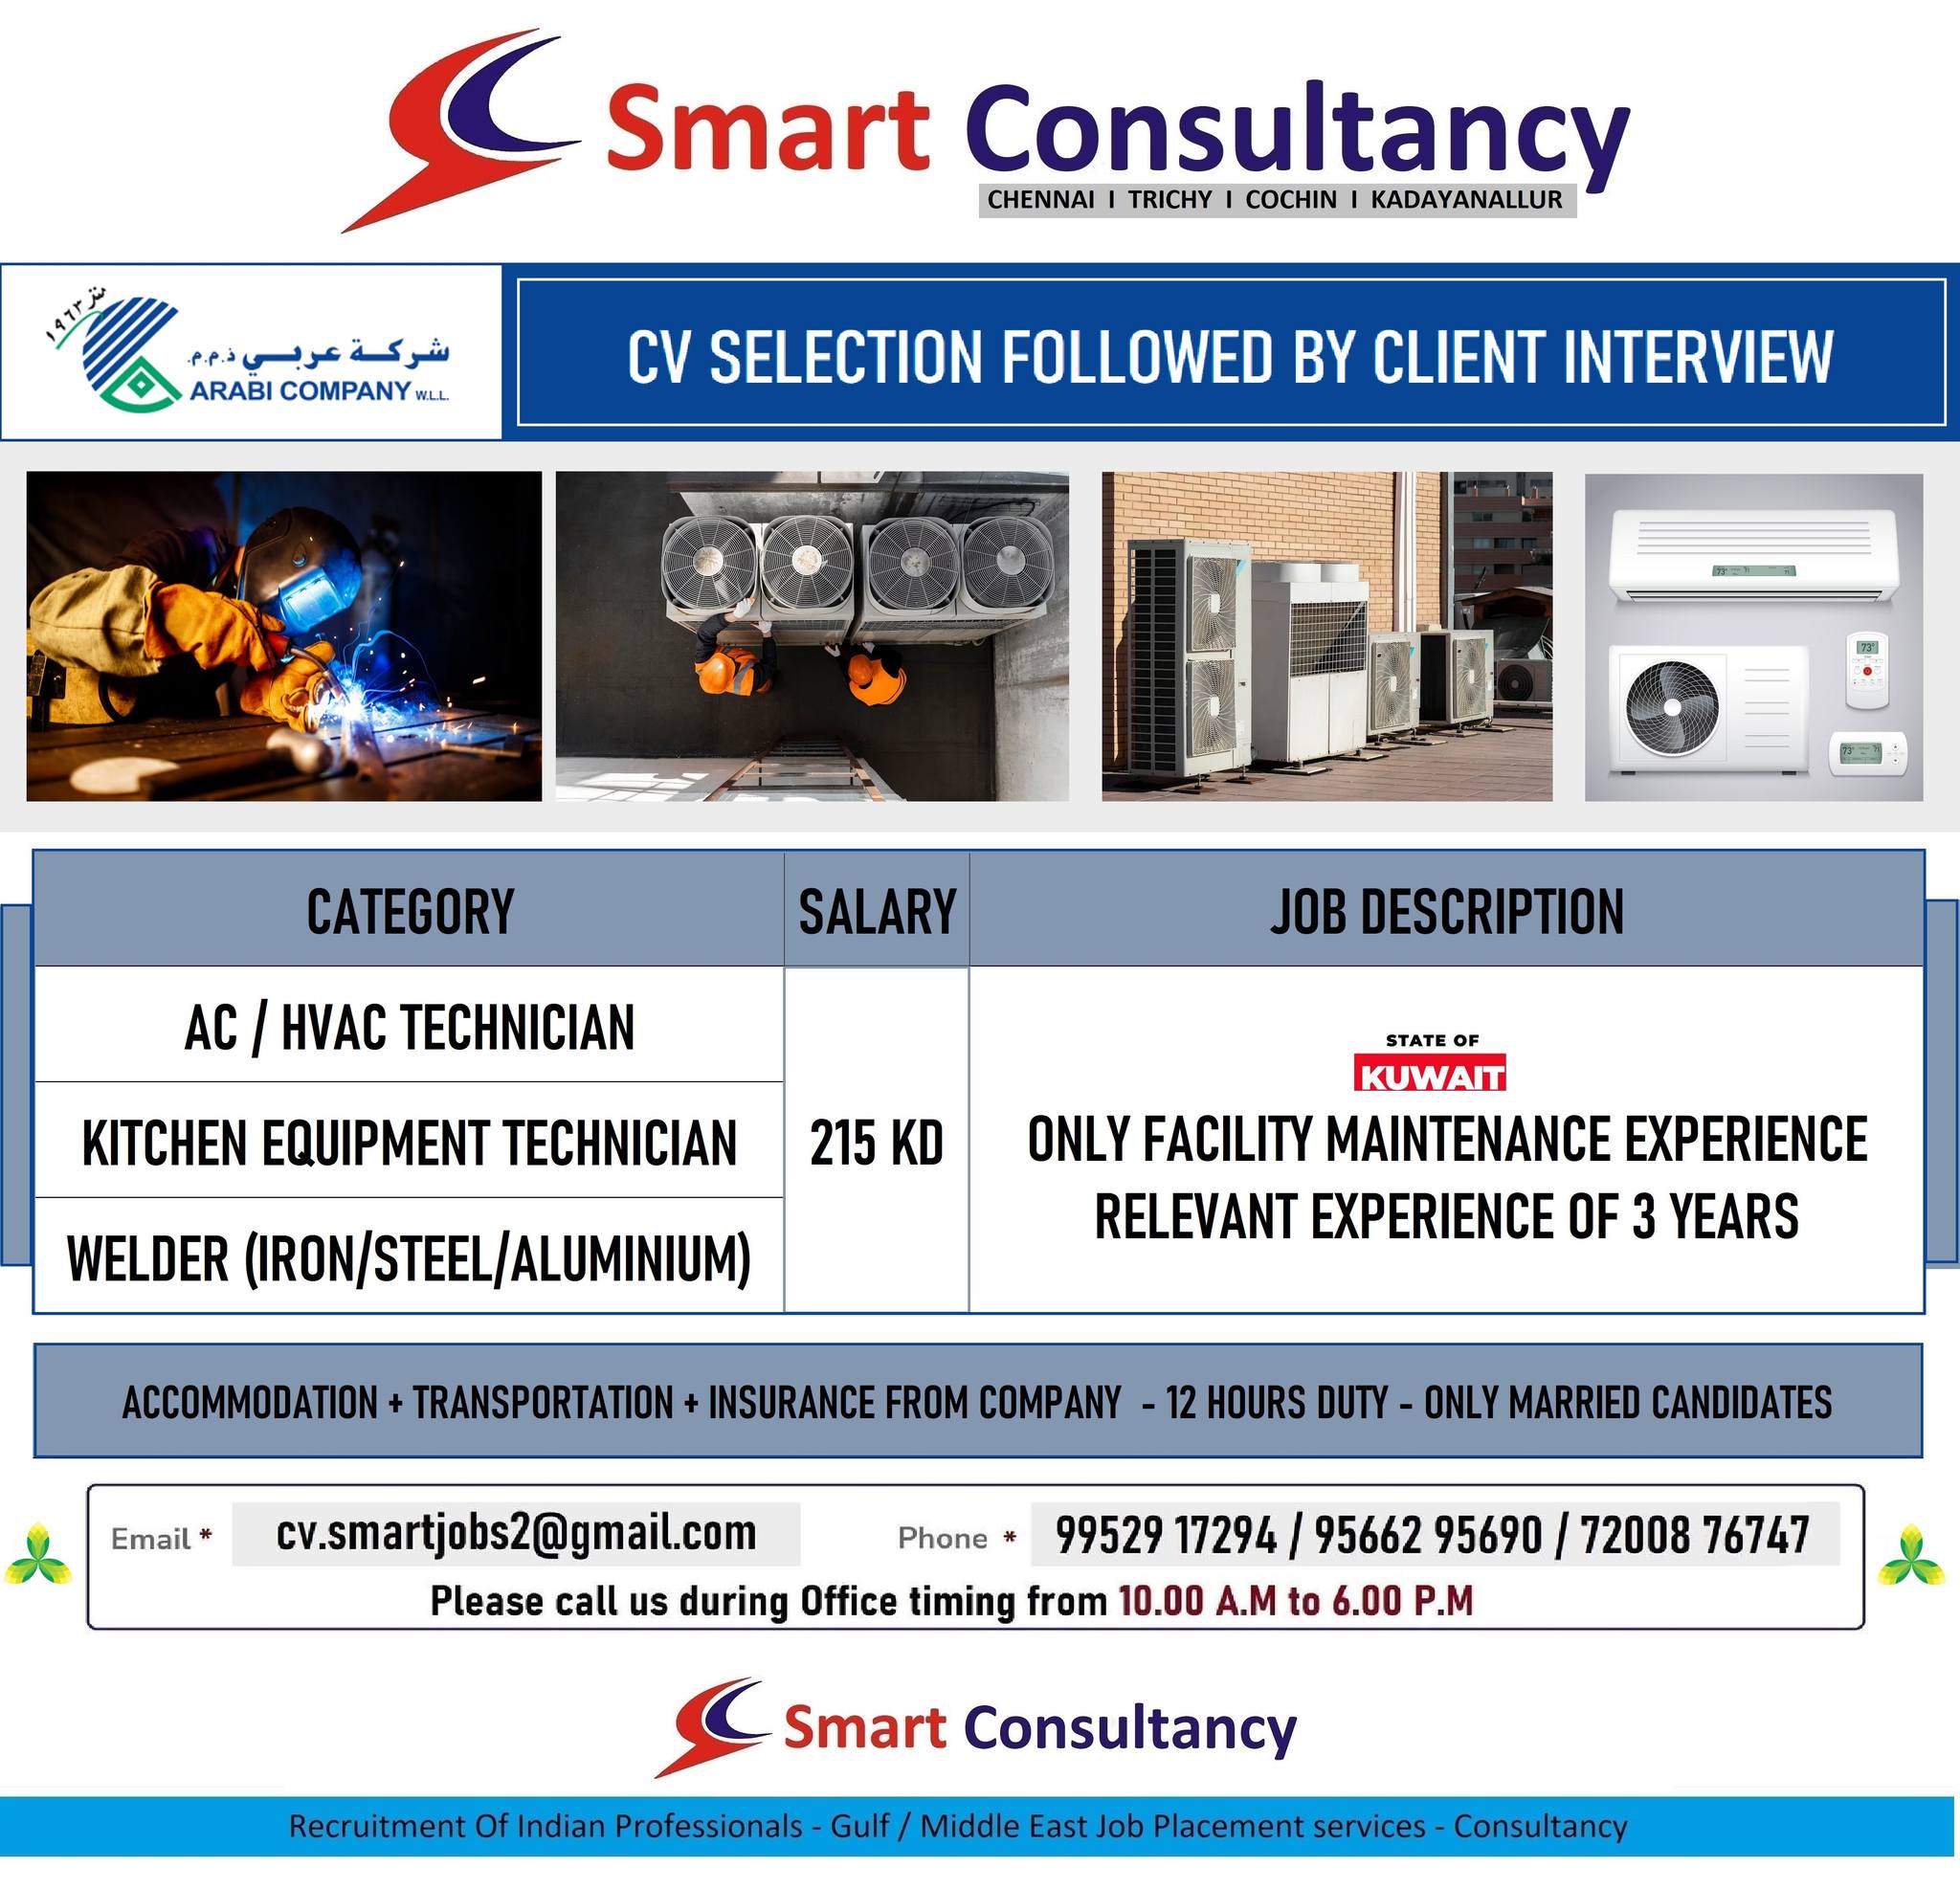 SELUH (KUWAIT) -CV SELECTION FOLLOWED BY CLIENT INTERVIEW